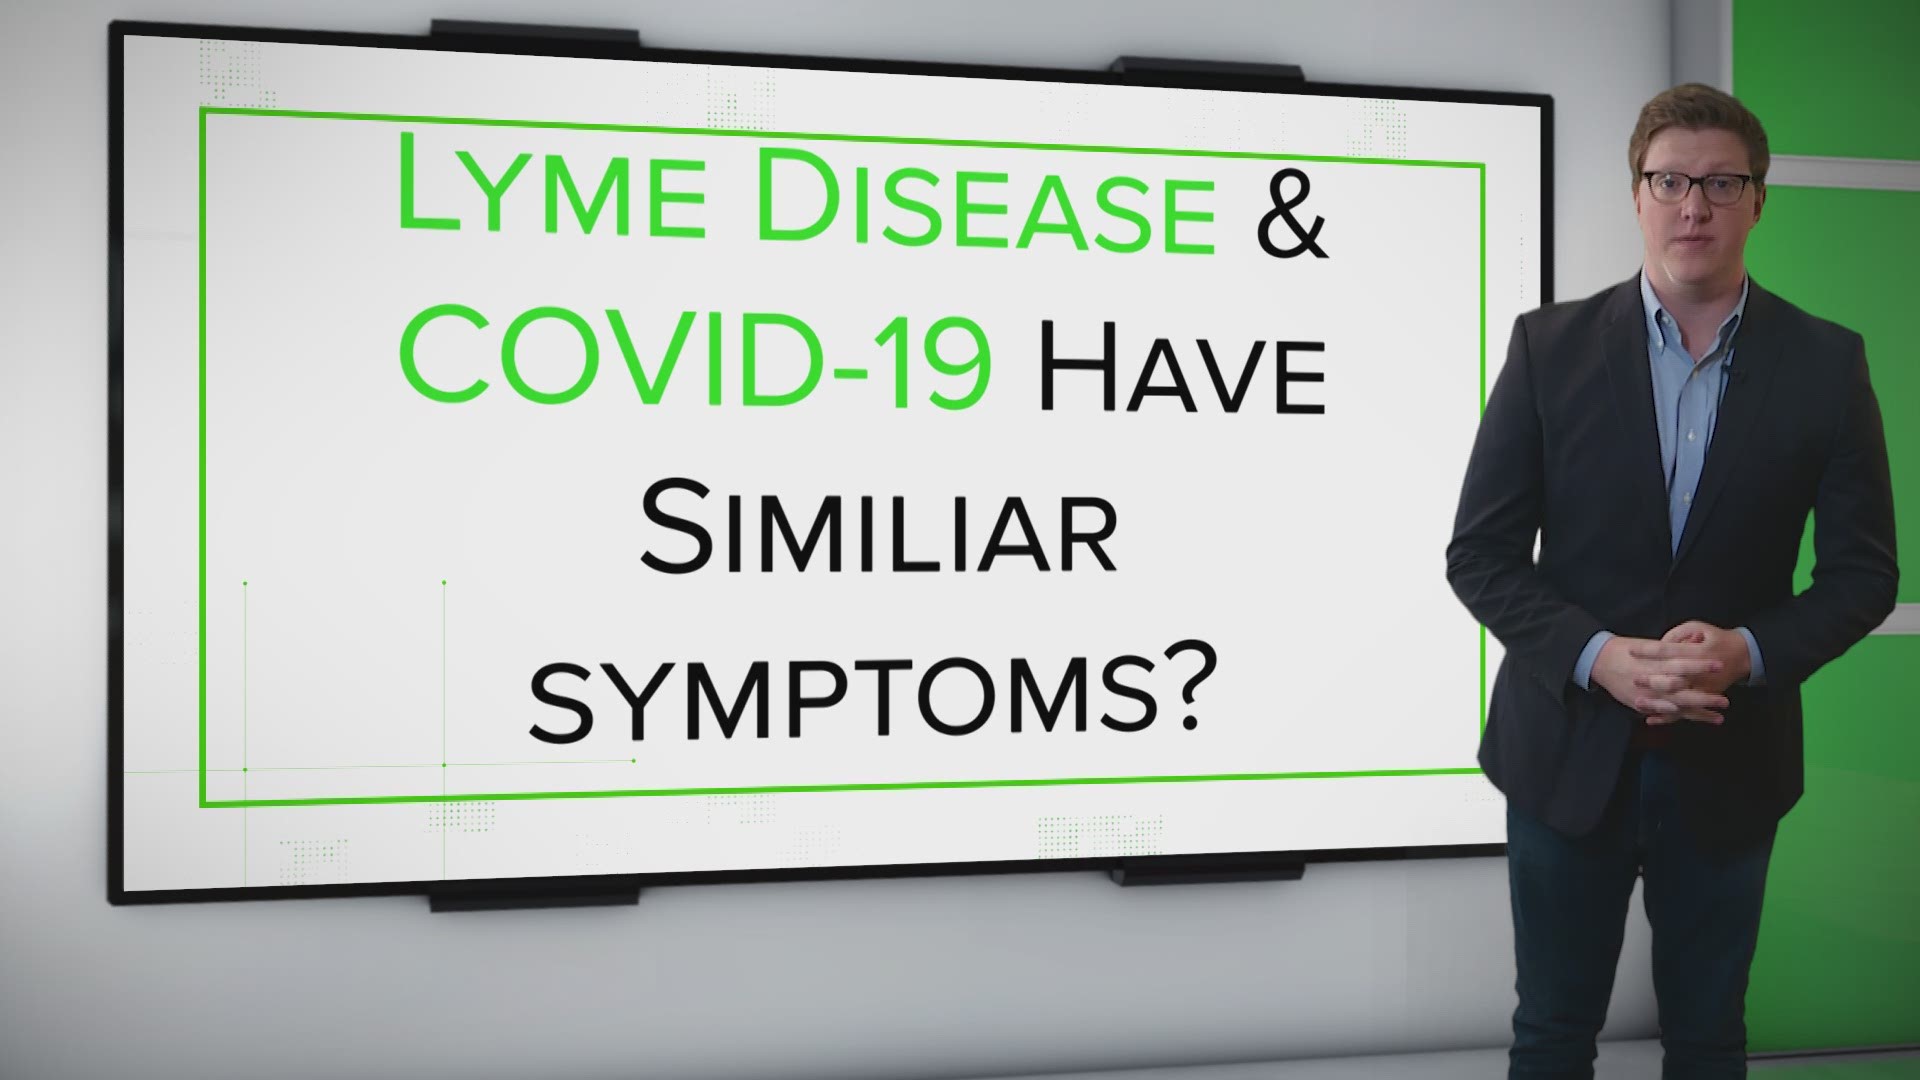 Lyme Disease has similar symptoms to COVID, but there are a few symptoms that make Lyme stand out. The WHO cleared up a misunderstanding earlier this week.